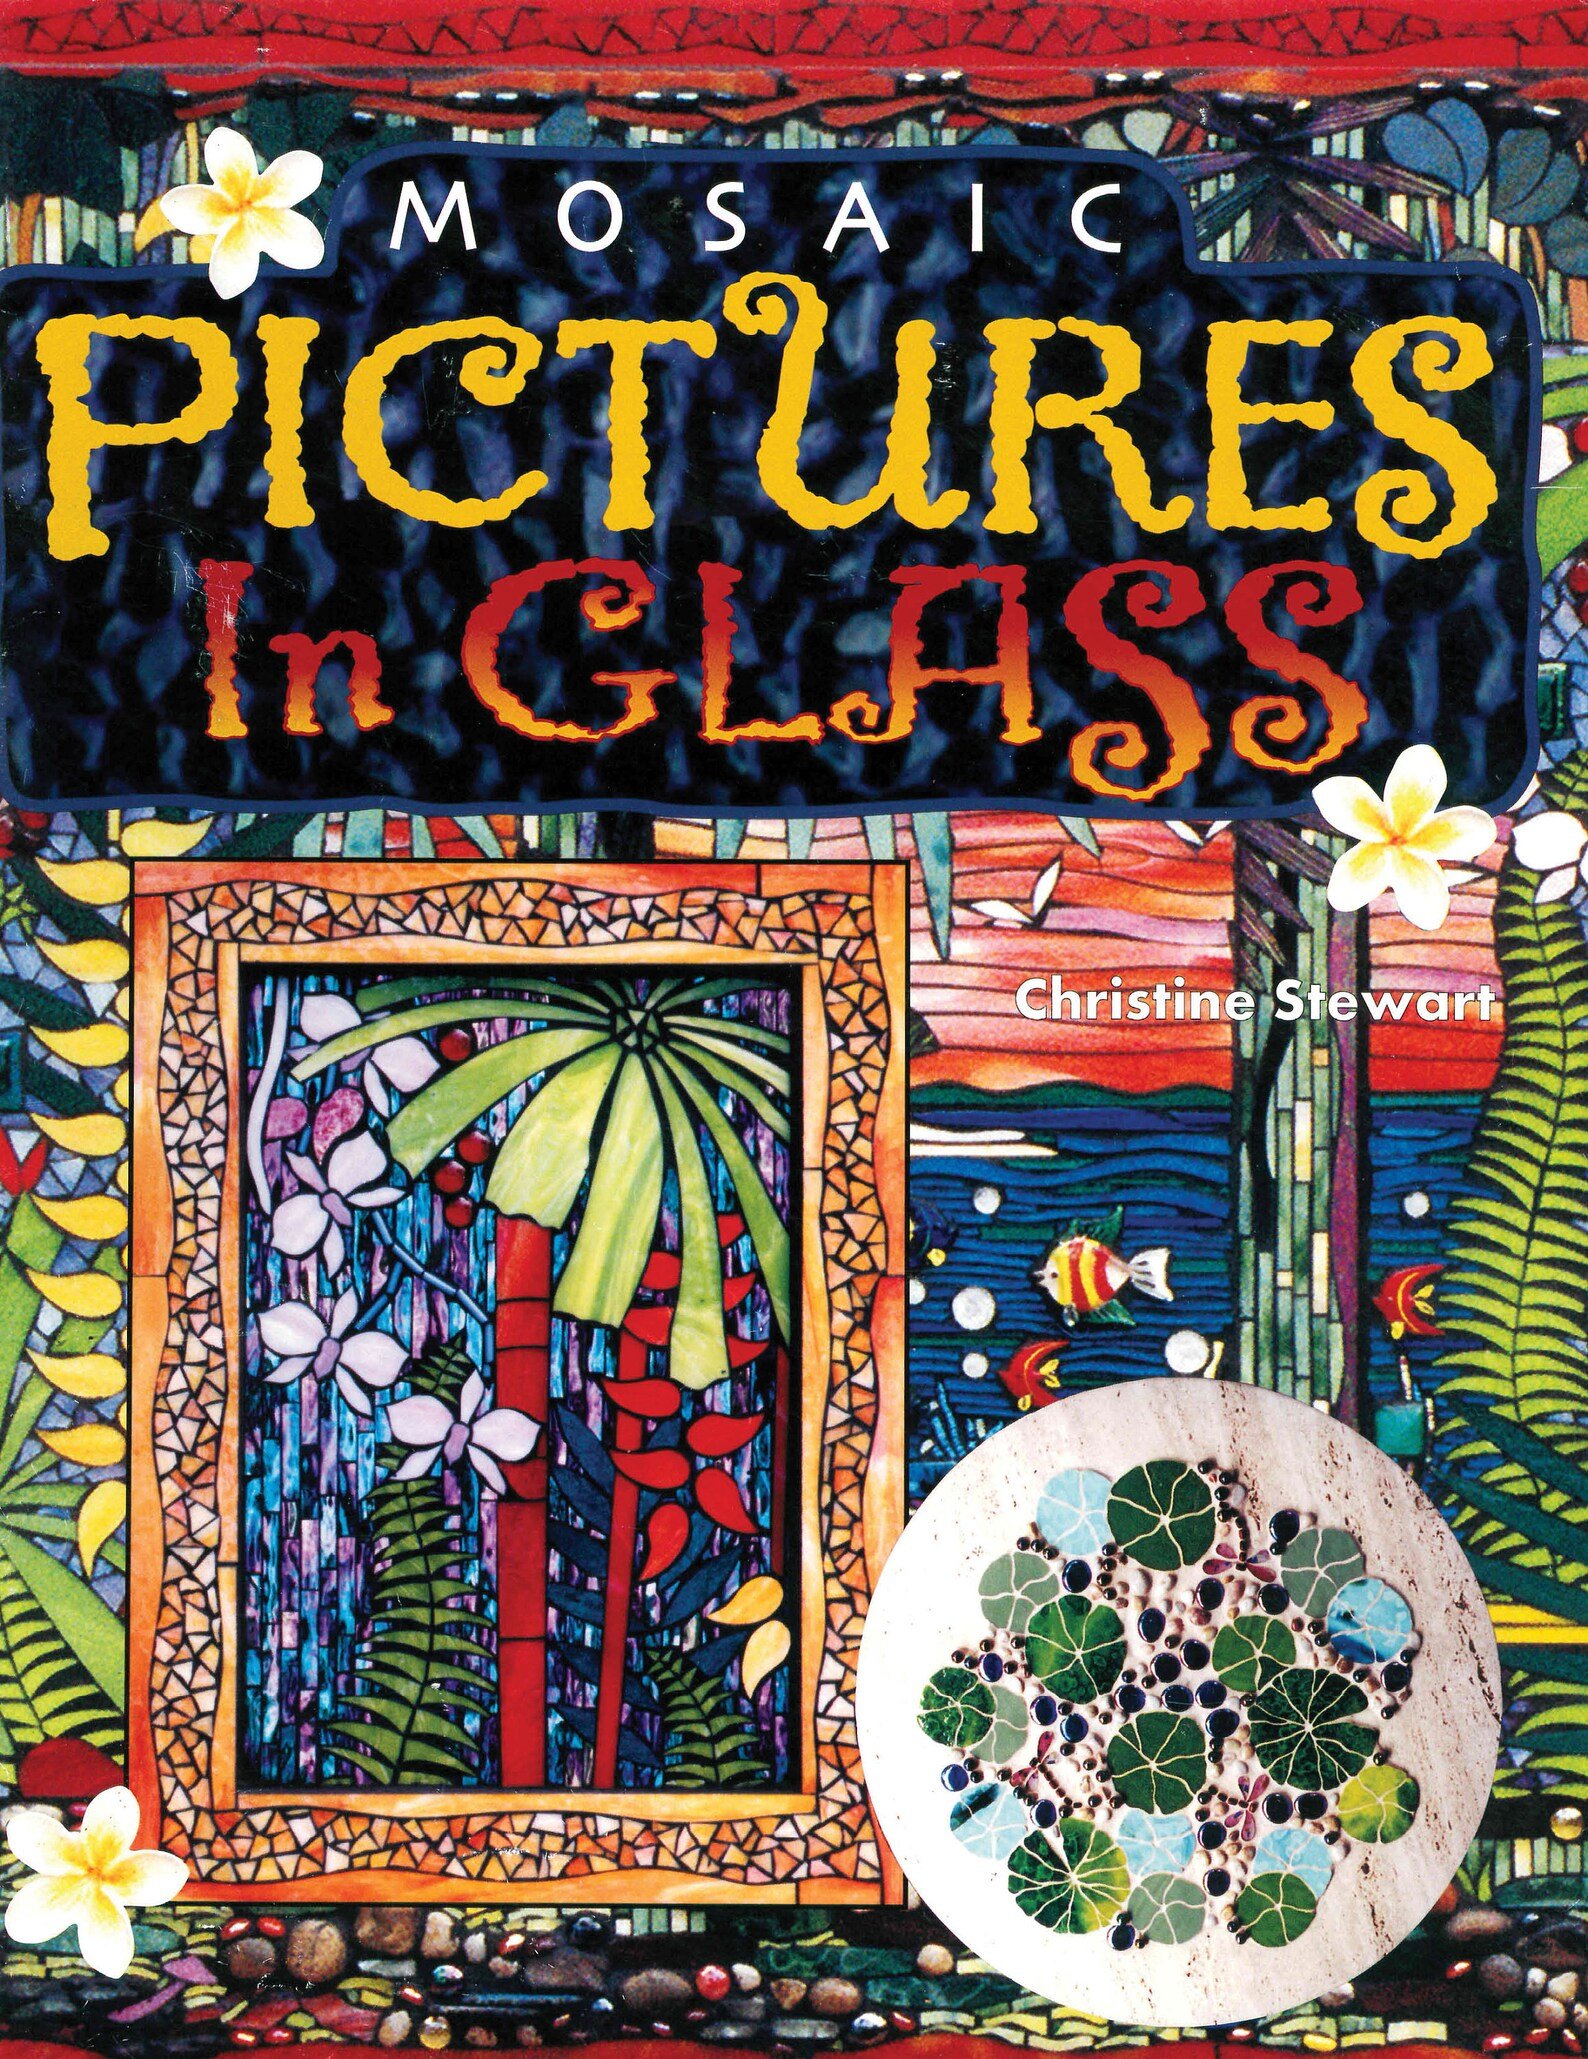  Mosaic Pictures in Glass by Christine Stewart. 